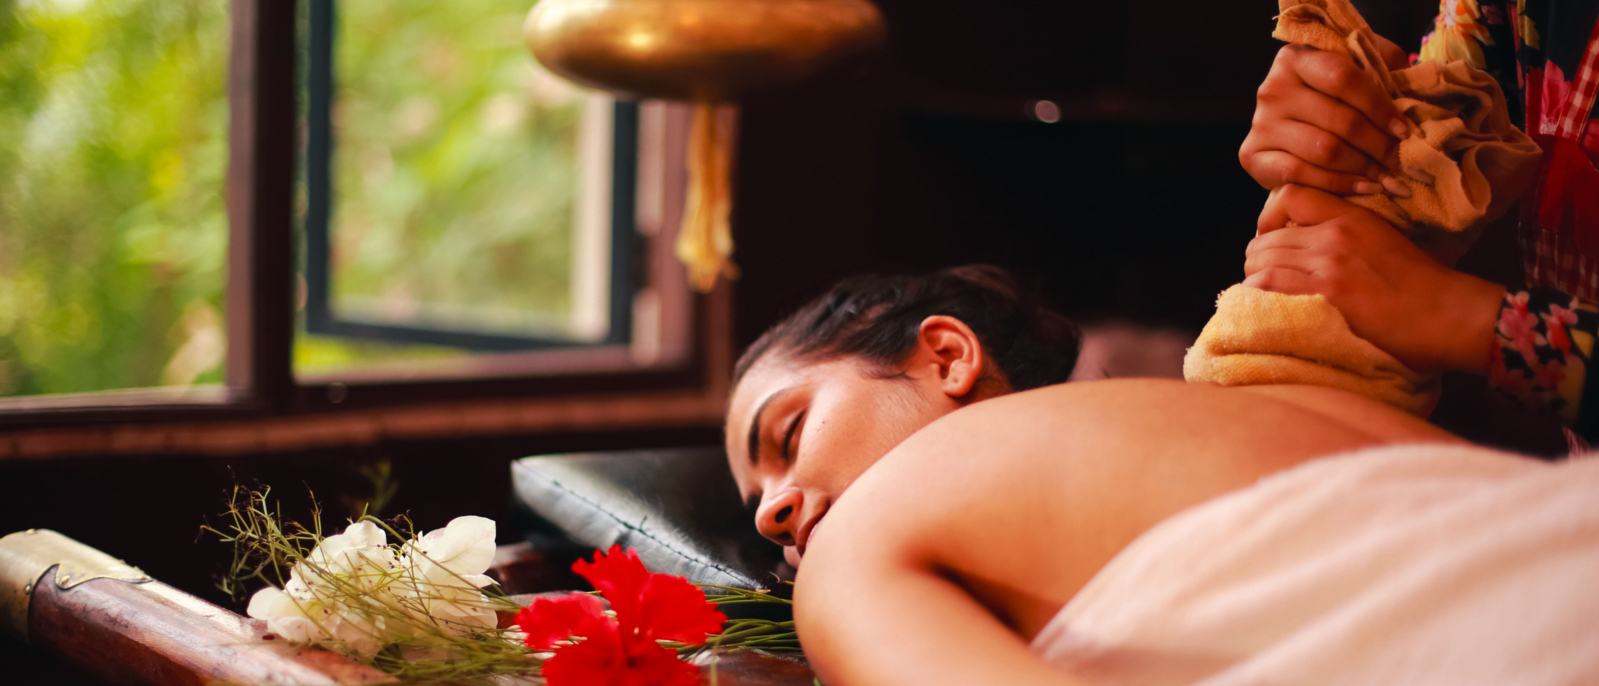 Female therapist treating a young lady in an ayurvedic spa following Indian traditional method